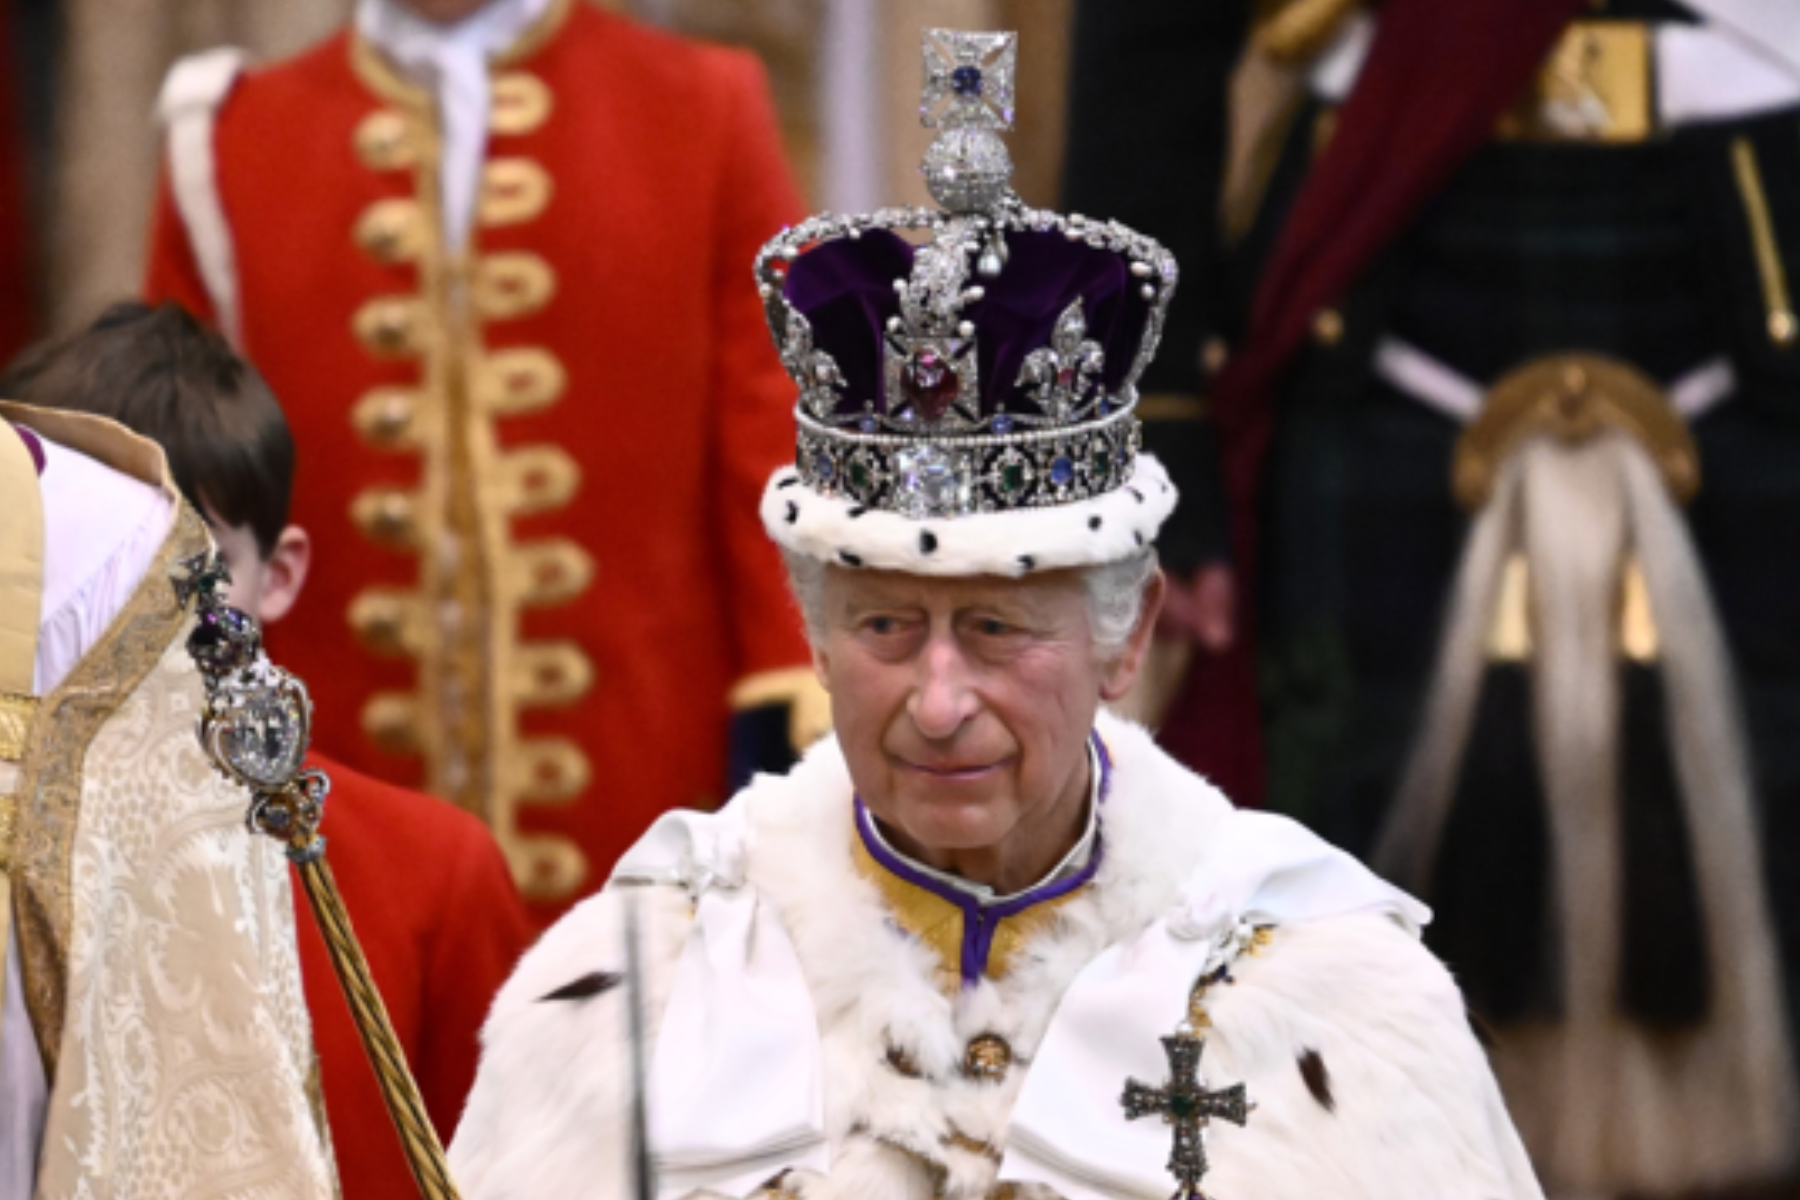 From The King’s Crown To Princess Kate’s Necklace, All The Jewels At The Coronation, Explained